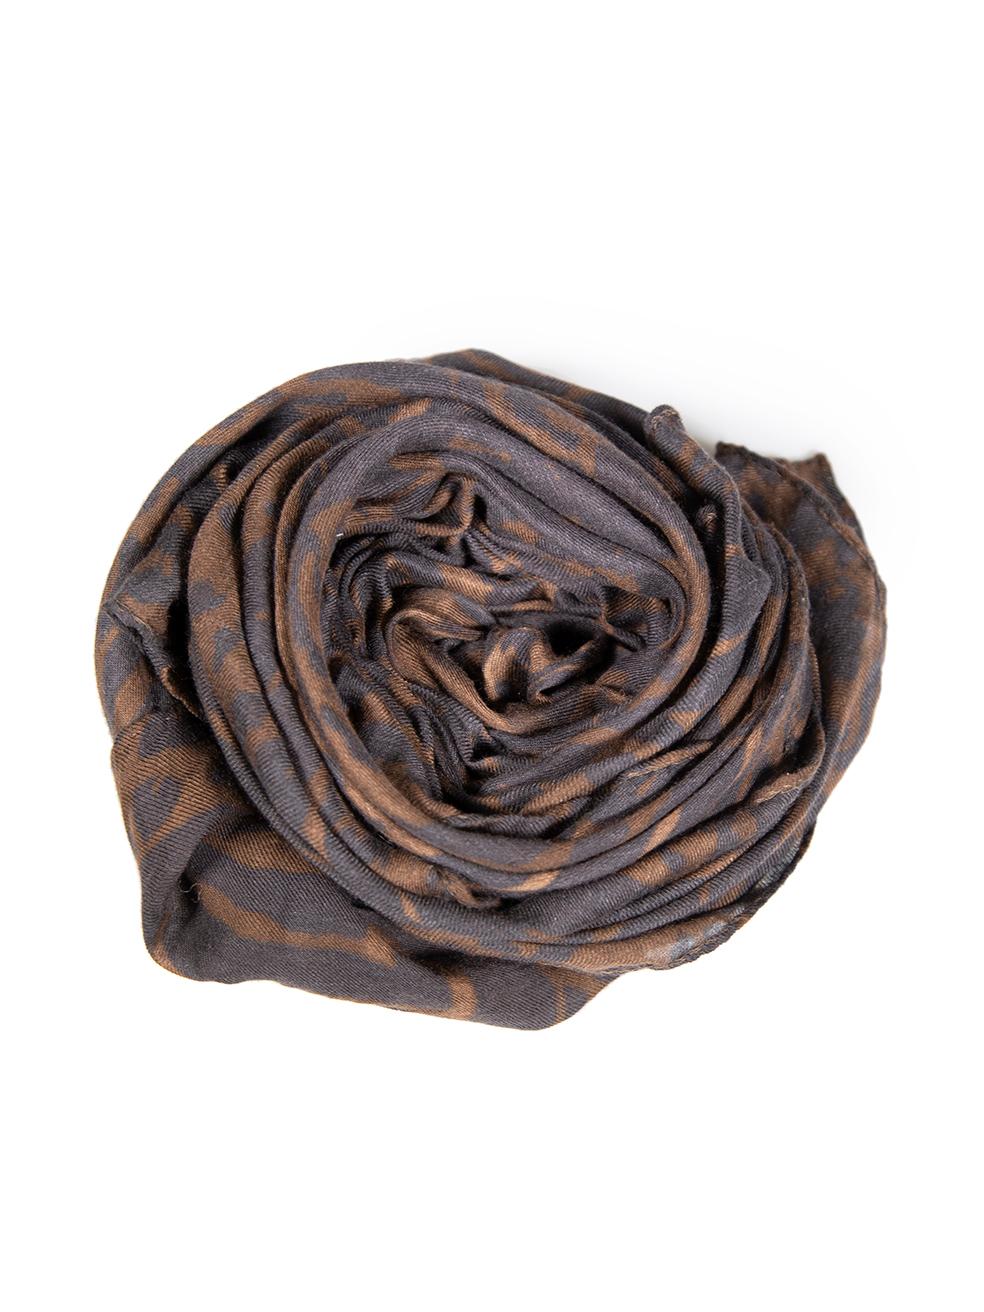 CONDITION is Very good. Hardly any visible wear to scarf is evident on this used Alexander McQueen designer resale item.
 
 
 
 Details
 
 
 Brown
 
 Modal
 
 Scarf
 
 Leopard print
 
 
 
 
 
 Made in Italy
 
 
 
 Composition
 
 90% Modal, 10%